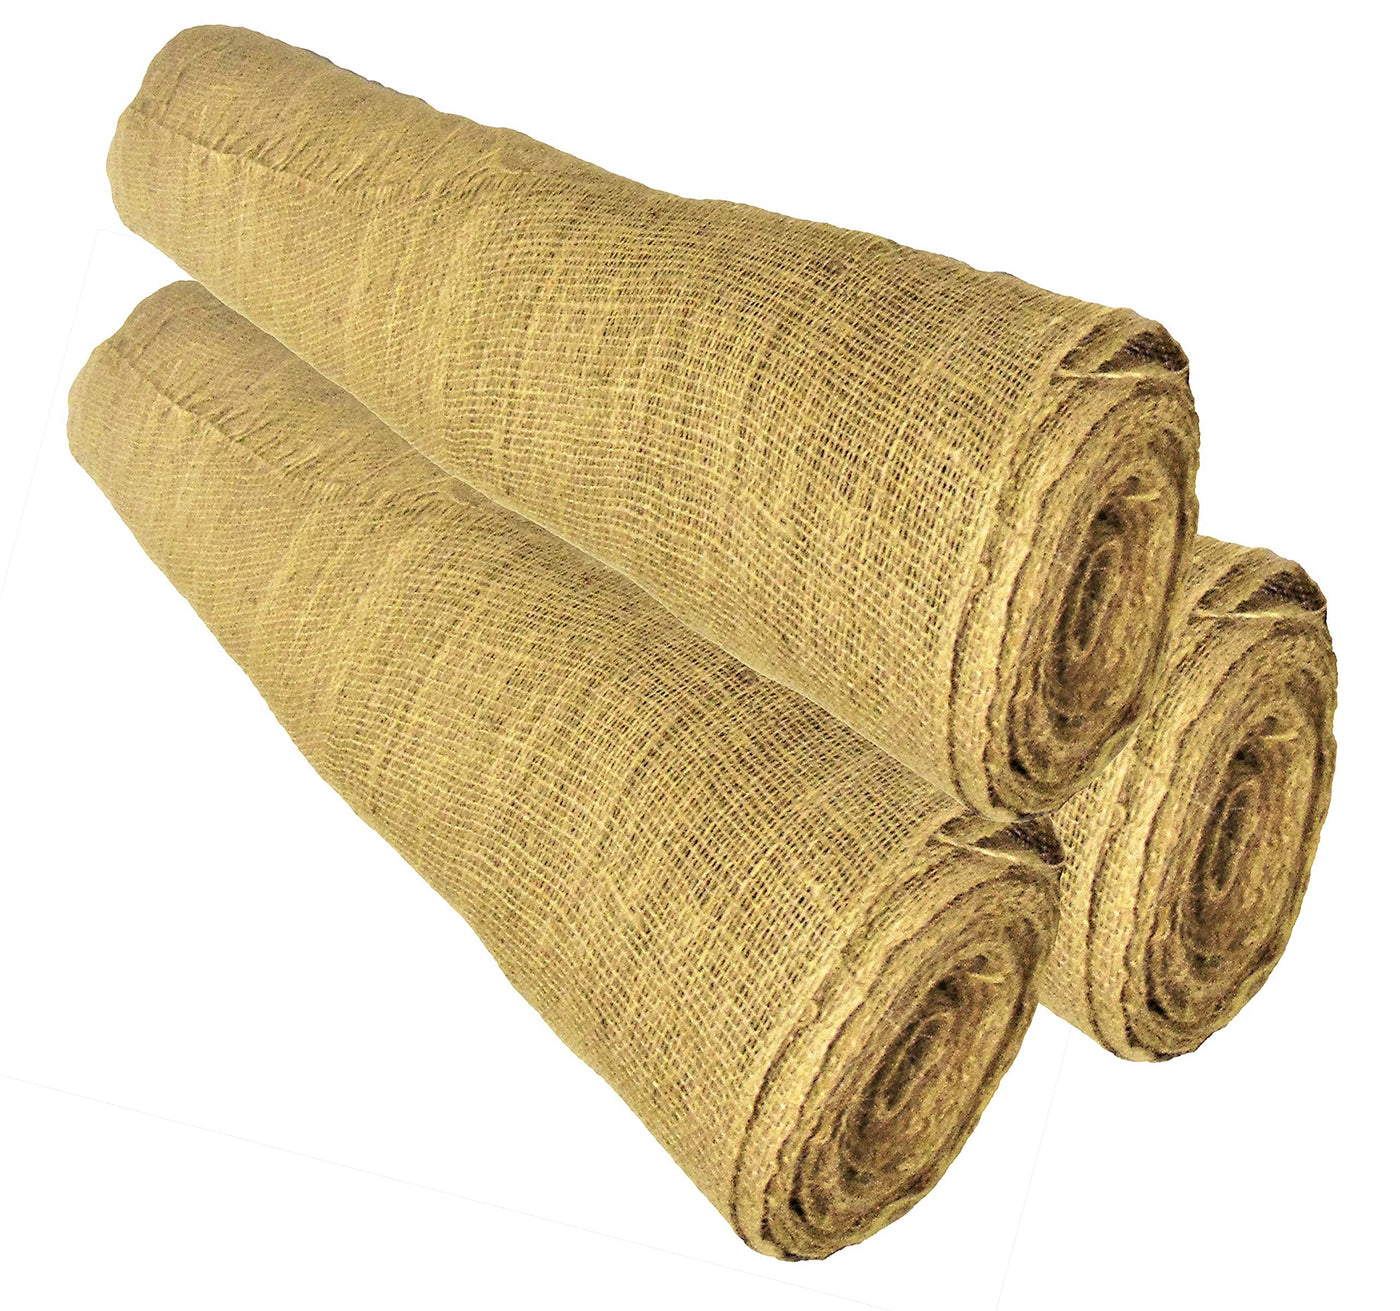 AAYU 30ft Burlap Fabric Liner Roll Premium Quality 40 inch x 10 Yards 7oz DIY Weed Barrier Eco-Friendly, Natural Jute Ribbon (30 ft)